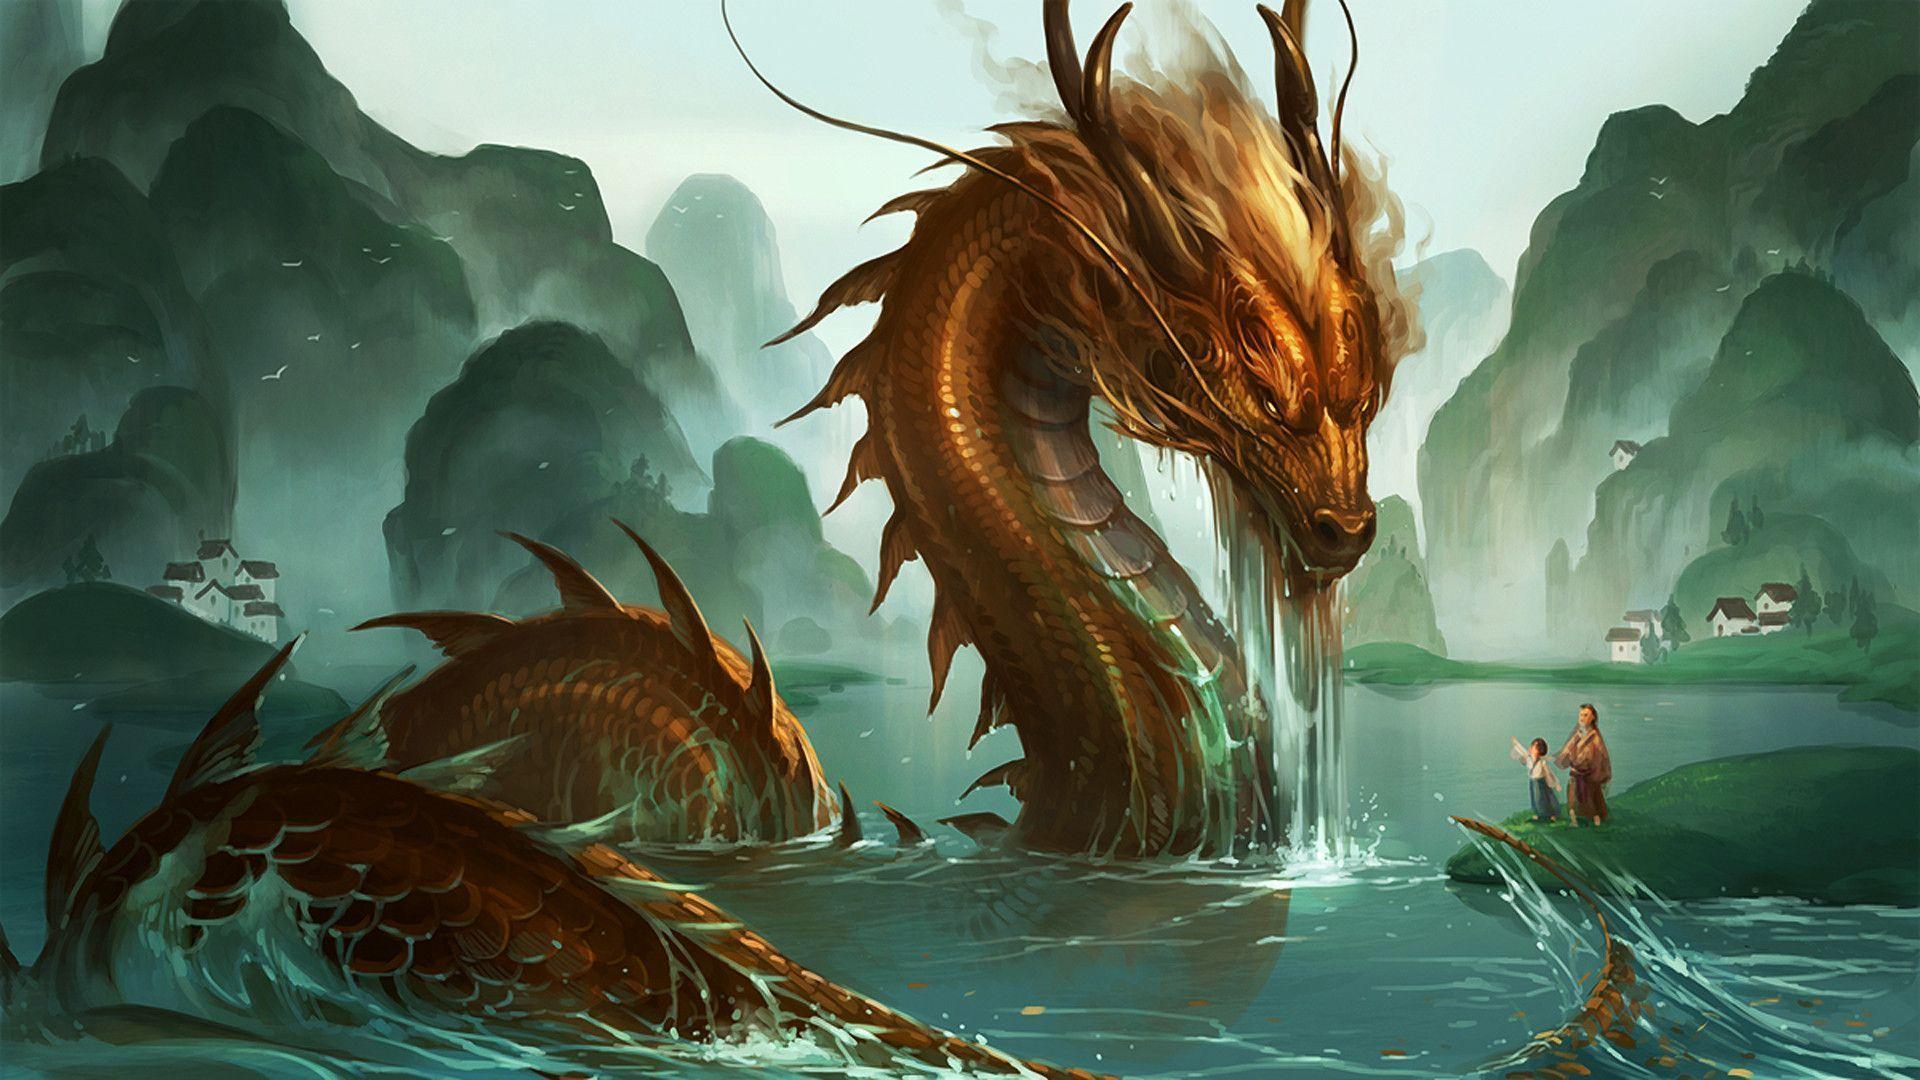 image For > Chinese Dragon Wallpaper 1920x1080